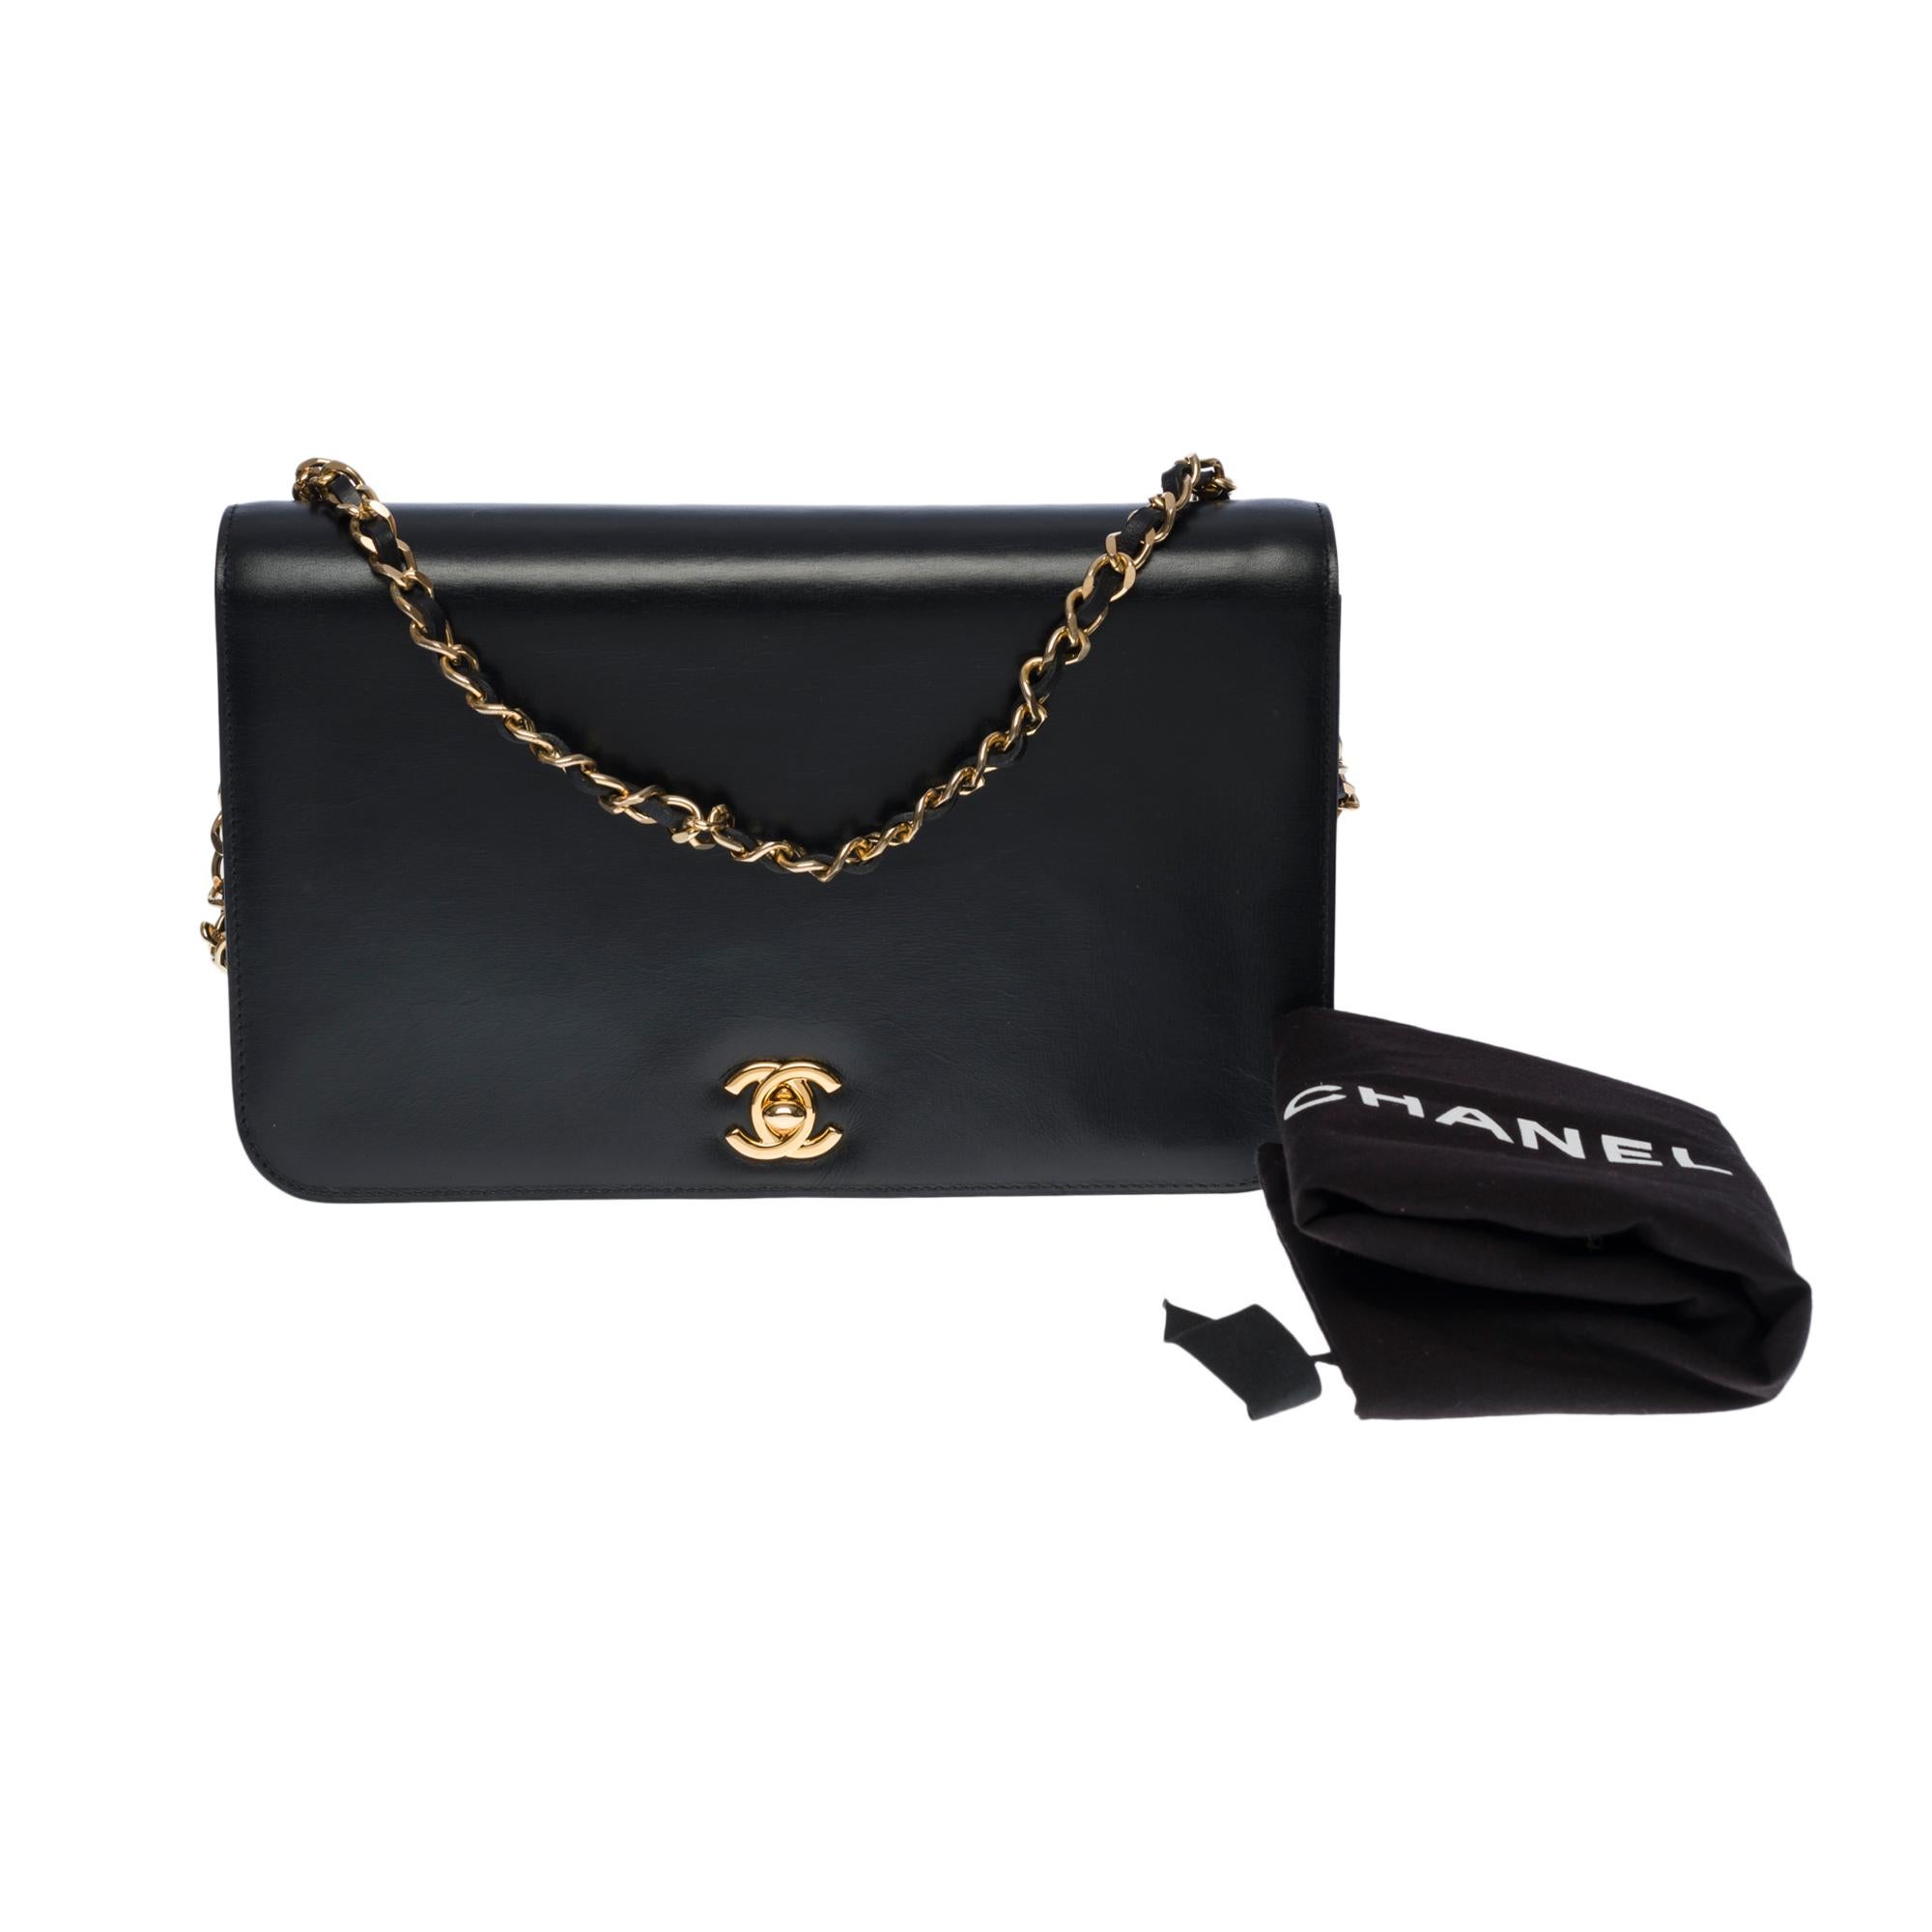 Chanel Classic Full Flap shoulder bag in black Calf leather and GHW 6